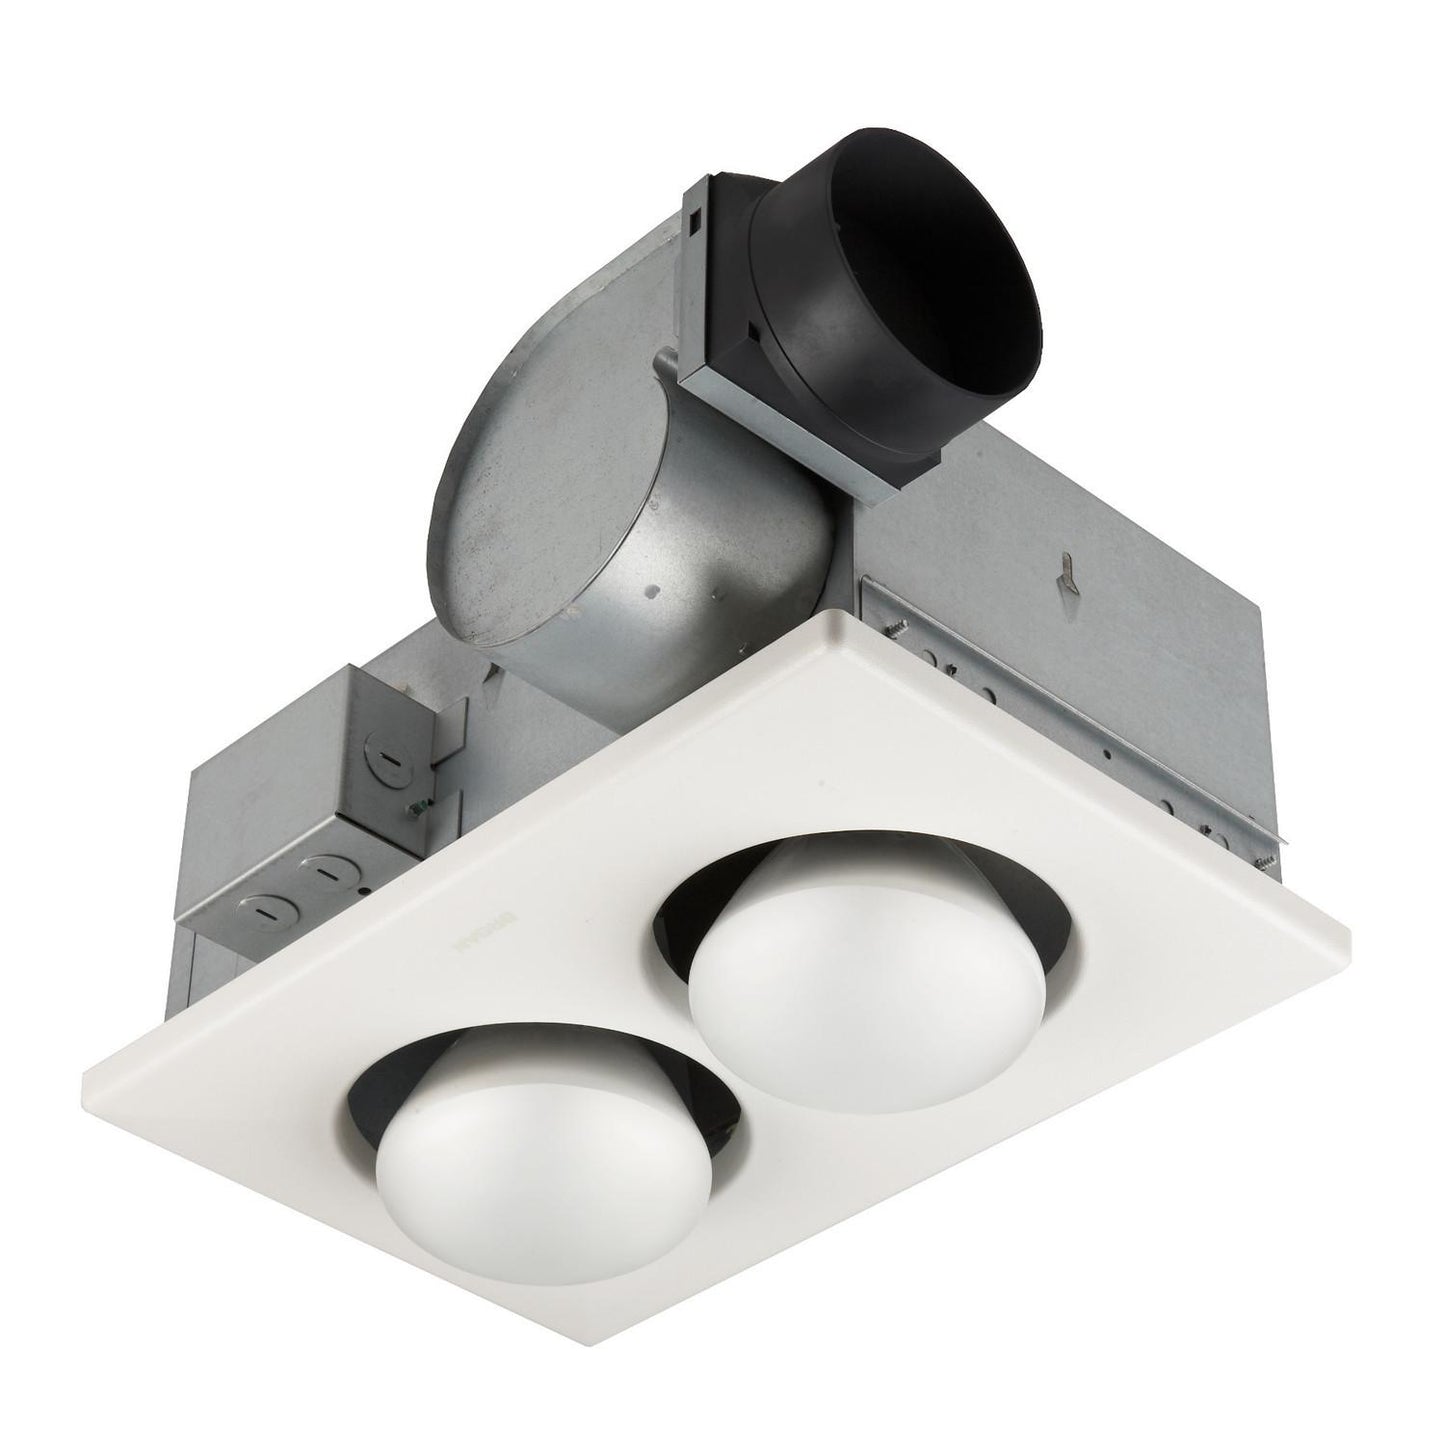 Broan 164 Broan-Nutone® Wall Vent Kit, 3" Or 4" Round Duct